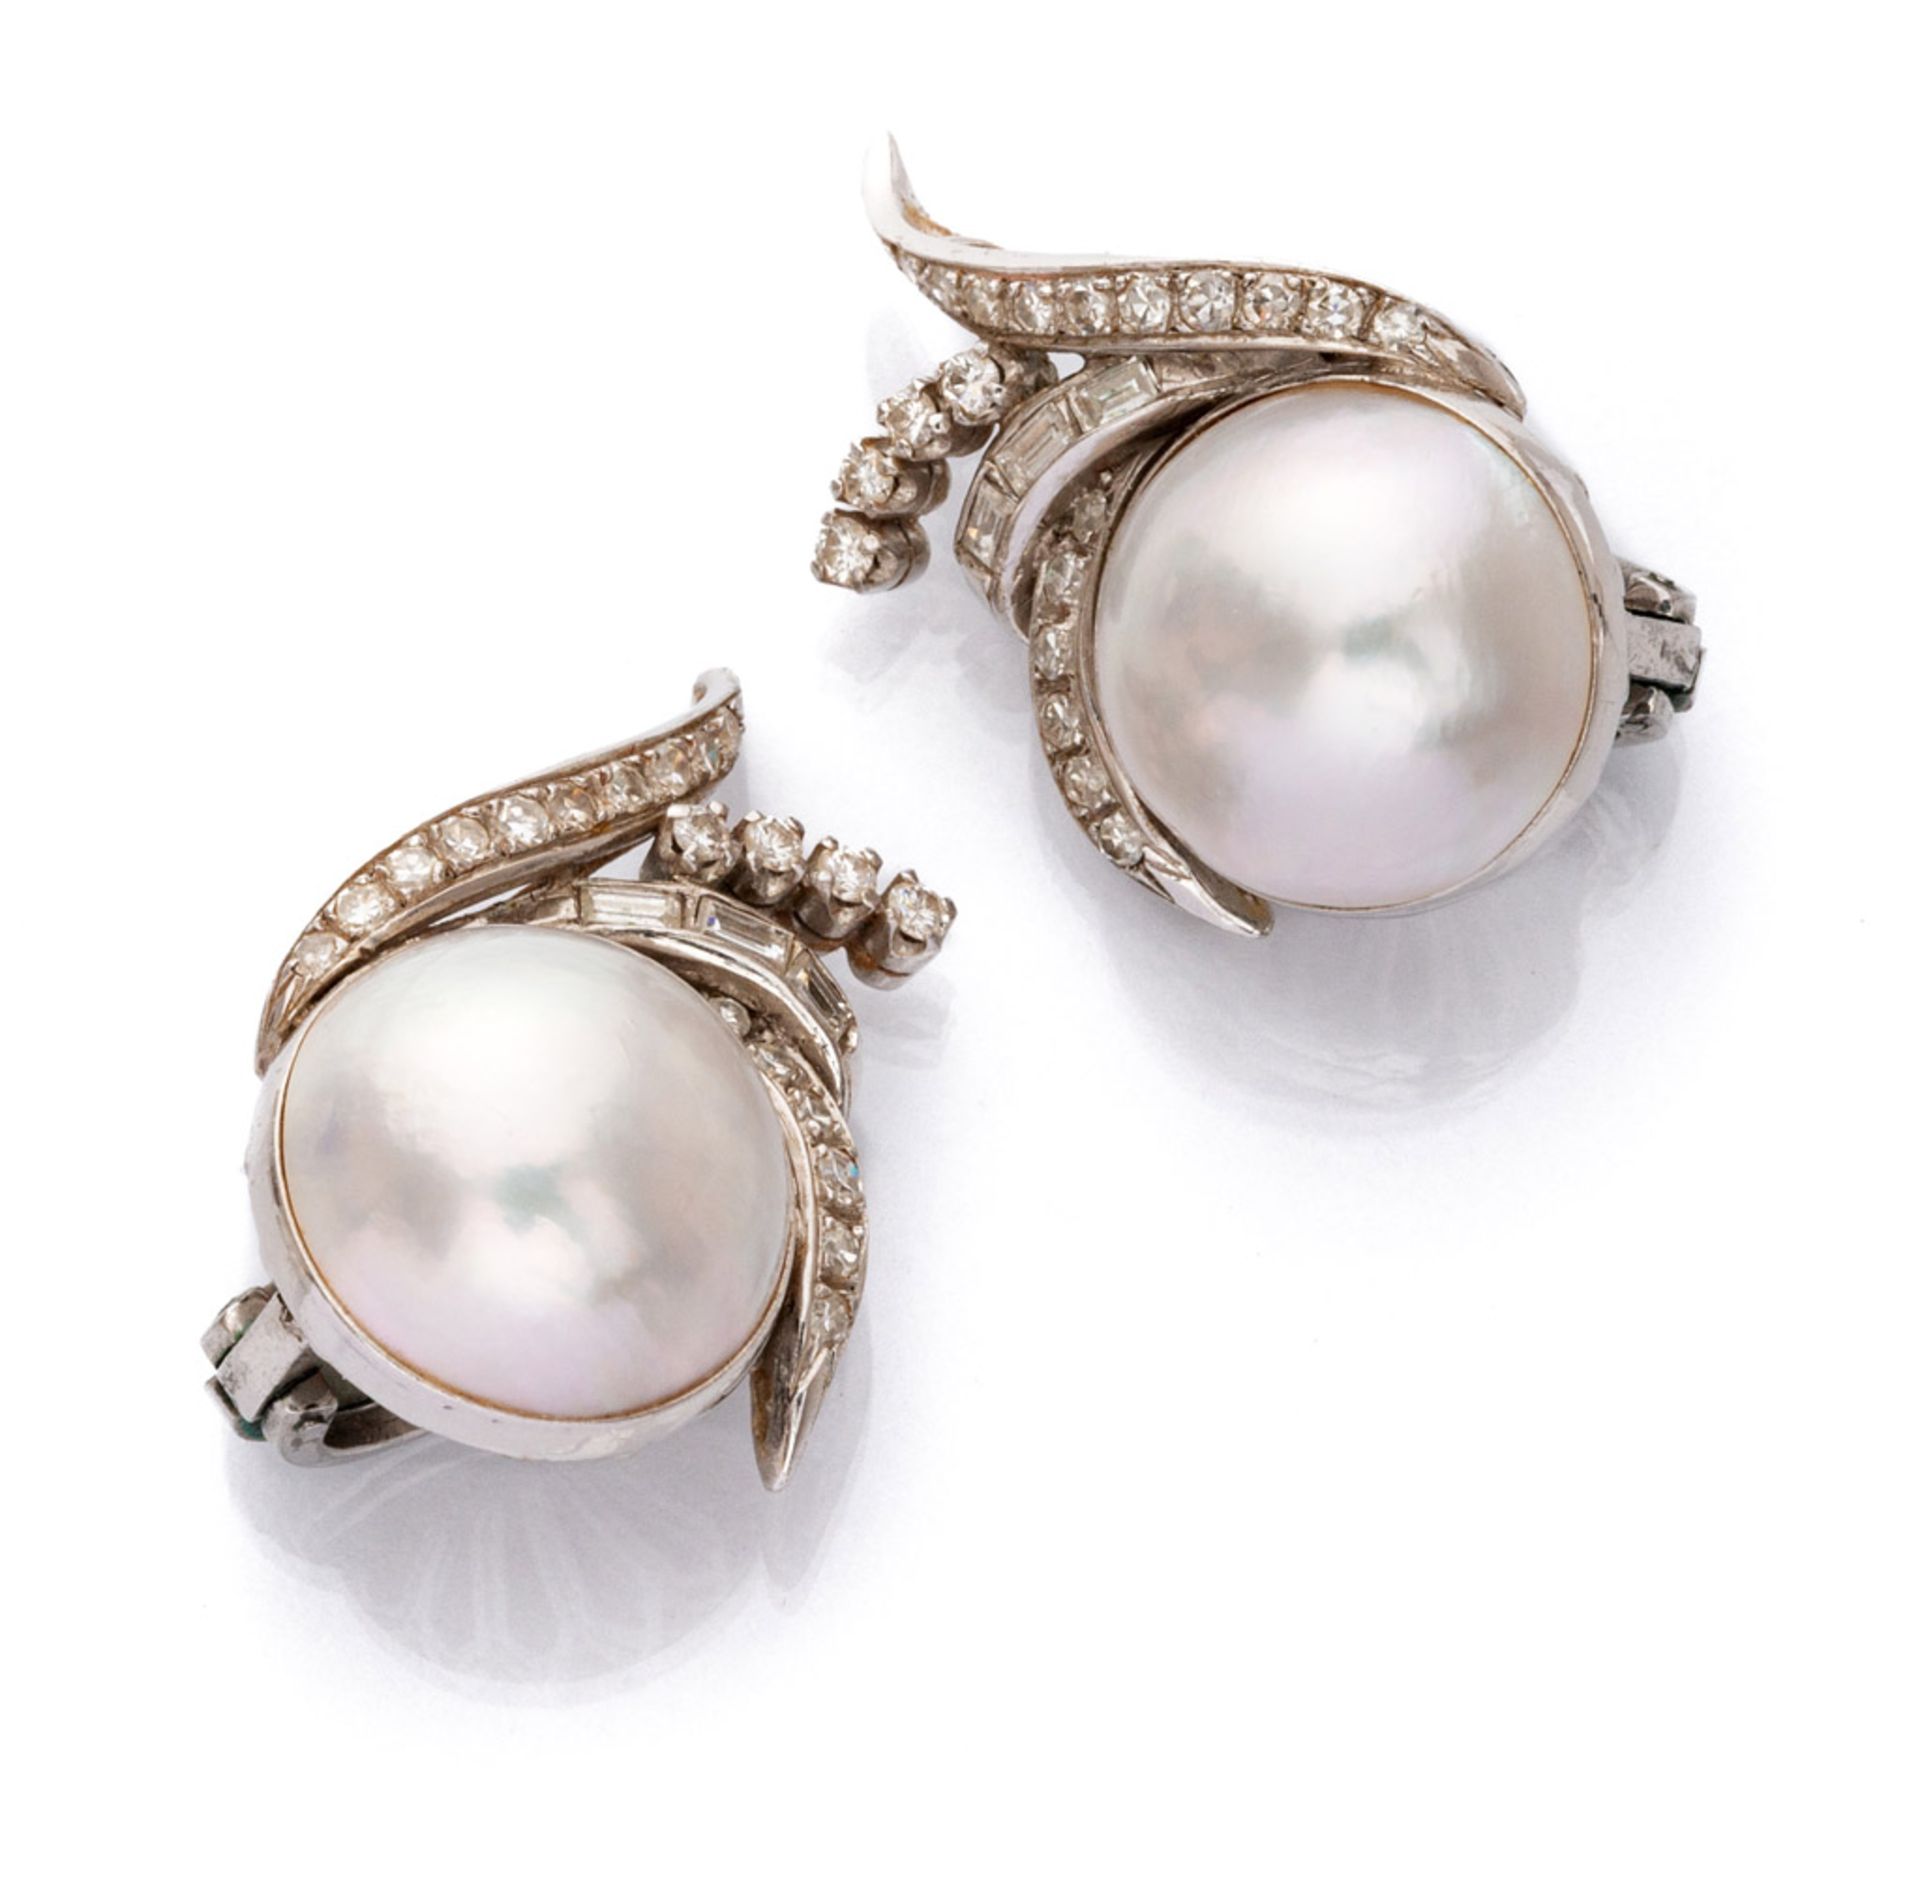 BEAUTIFUL PAIR OF EARRINGS in white gold 14 kts., with mabé pearl surrounded by branches decorated